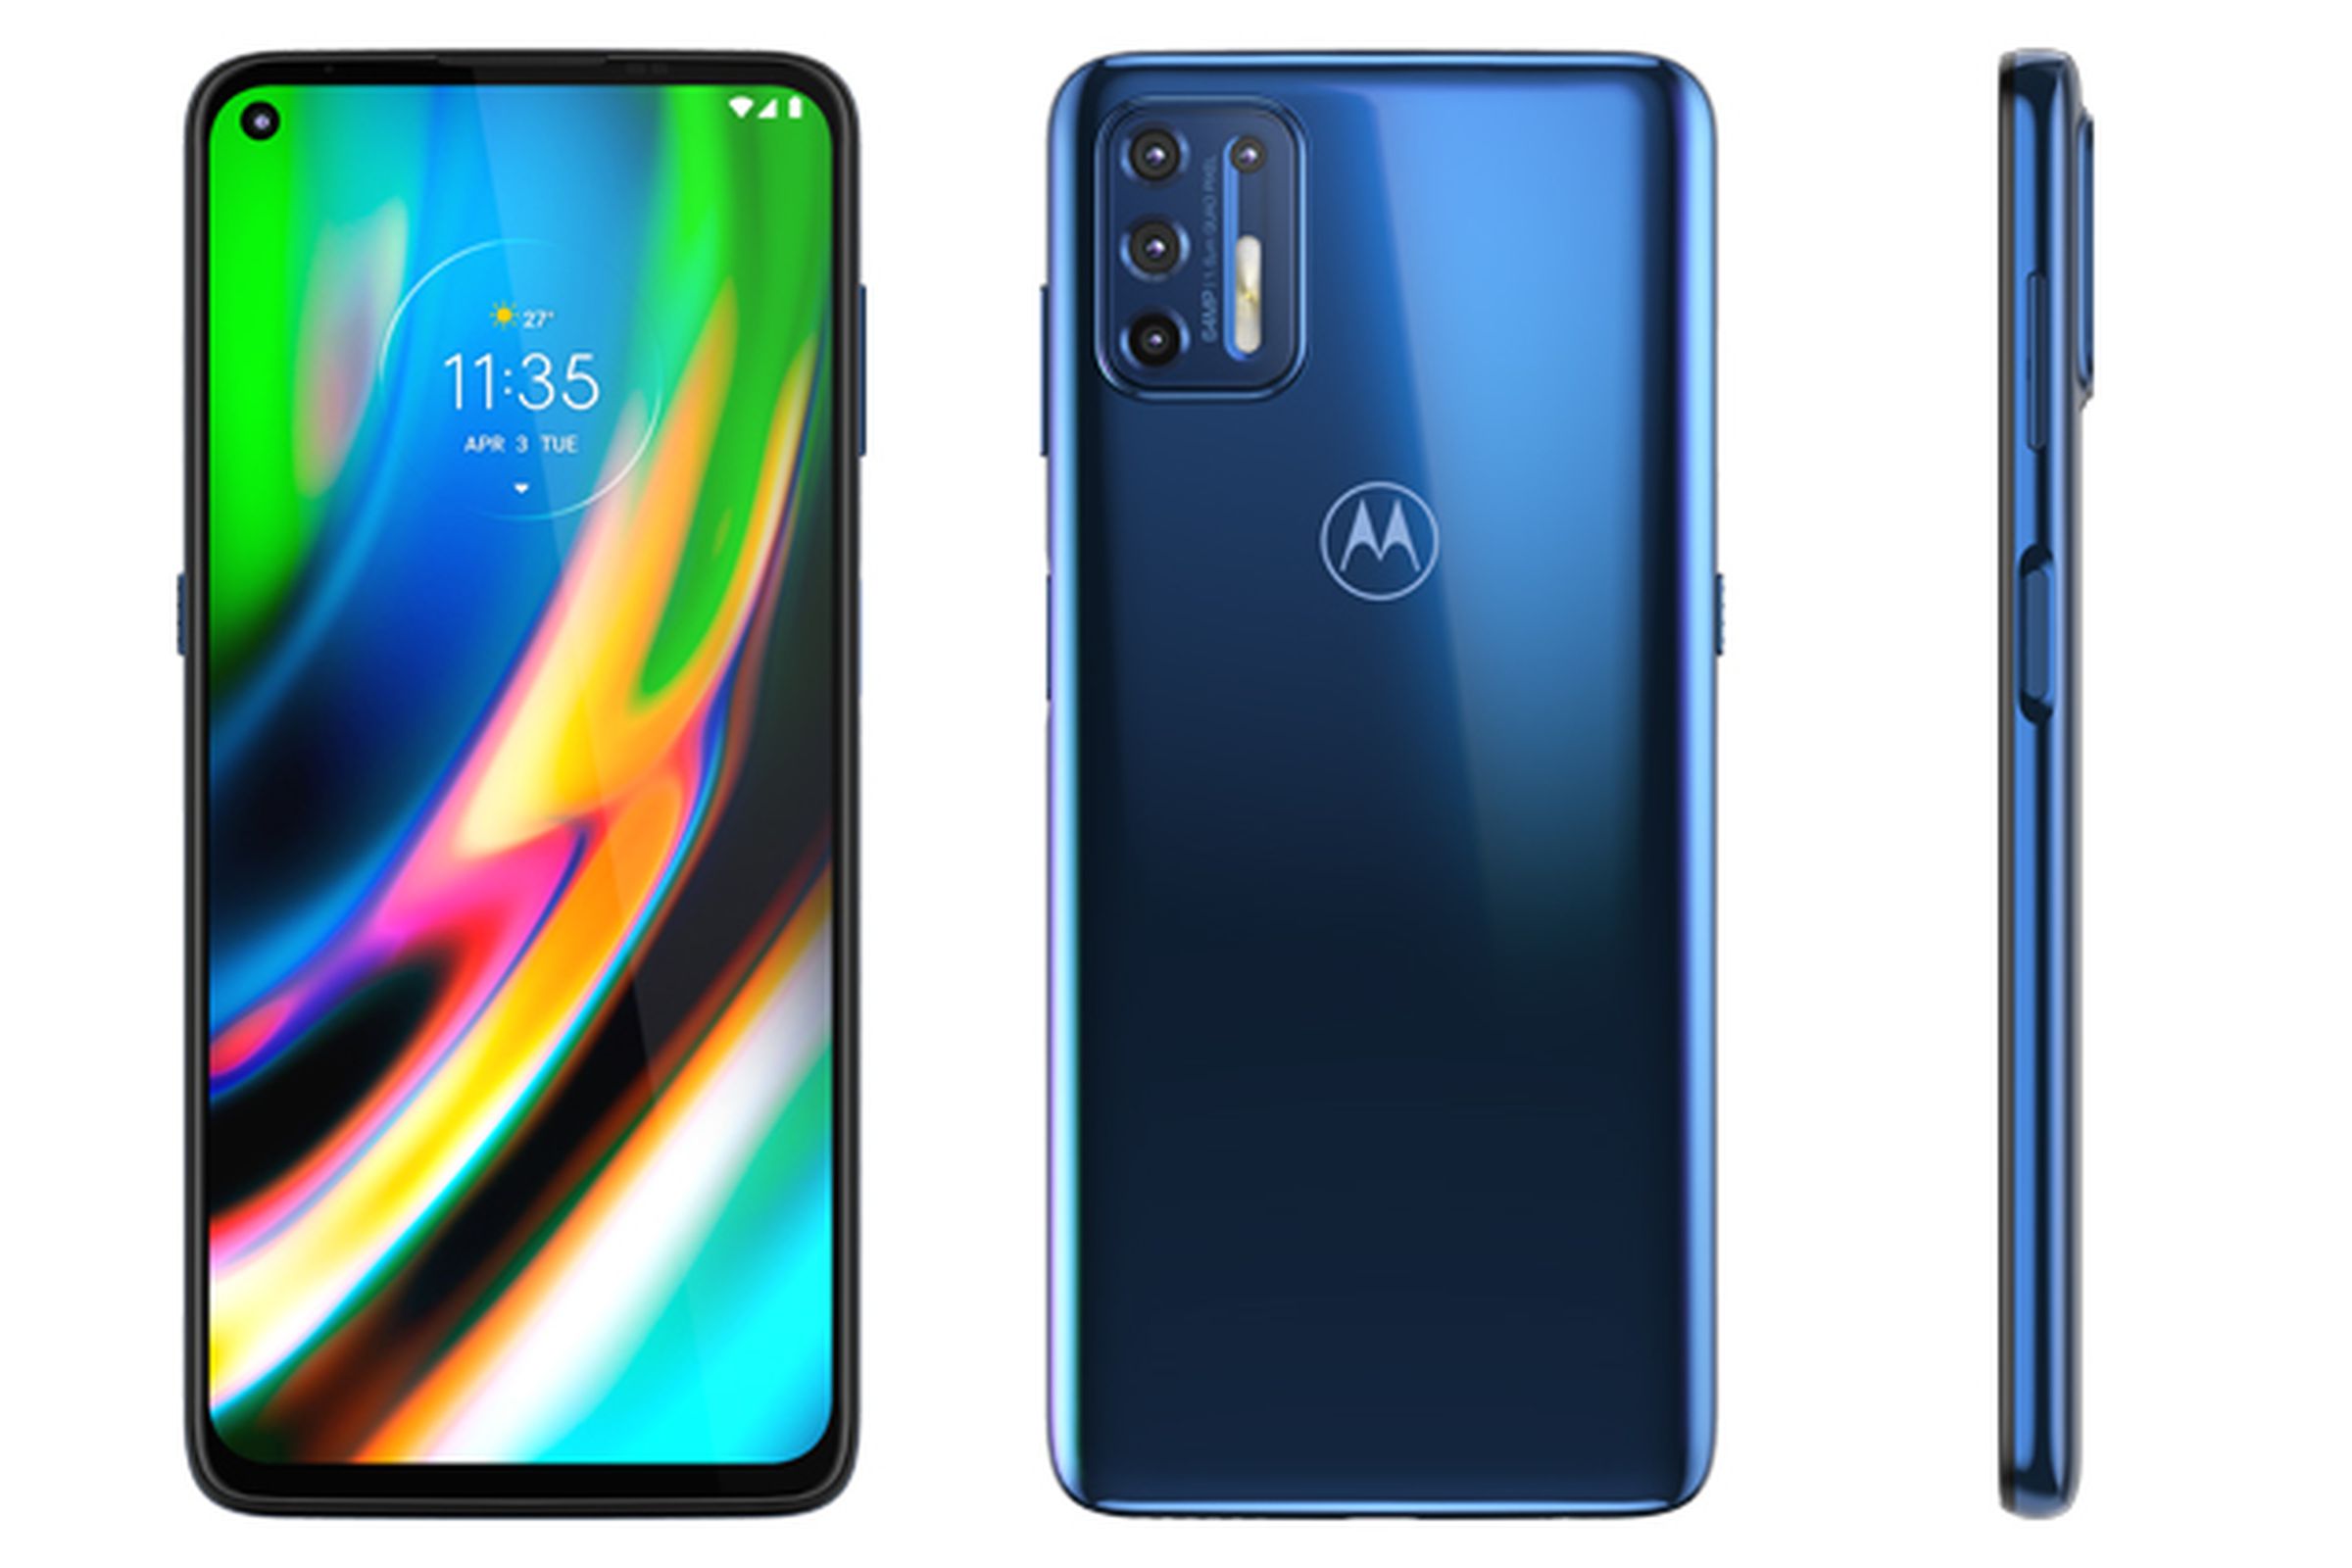 The Moto G9 Plus is shown with four rear cameras and a hole-punch display notch.